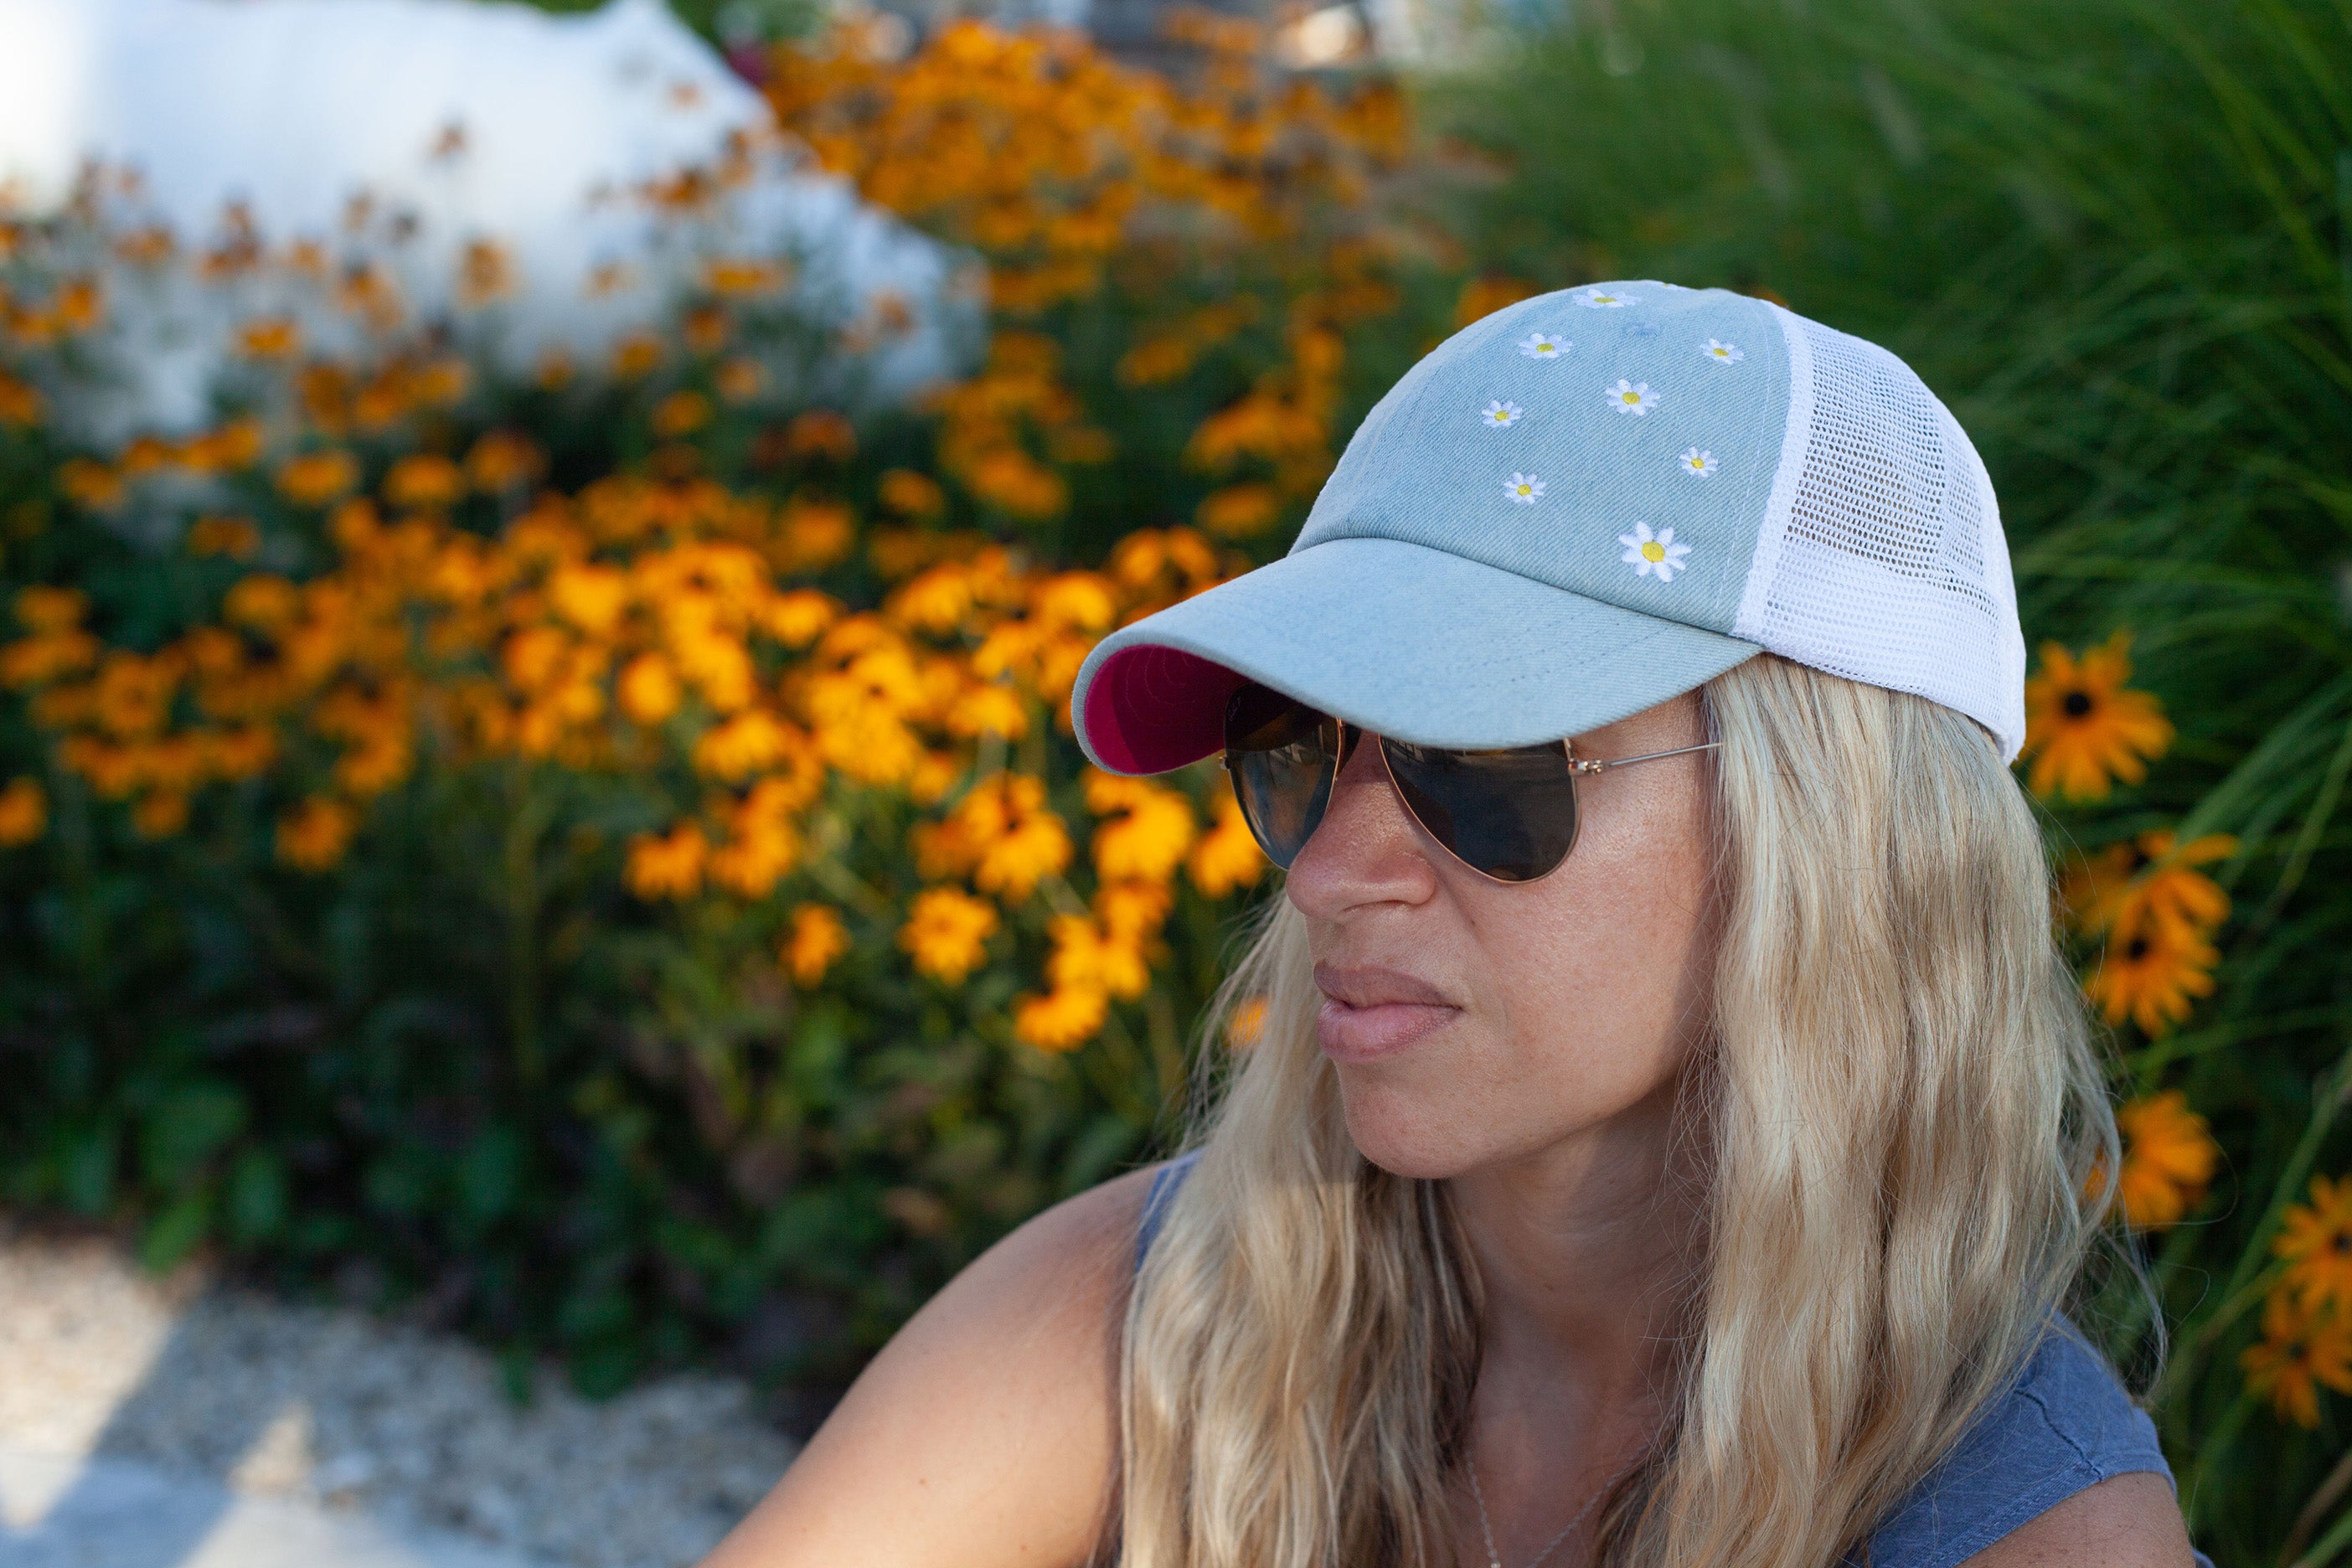 Women’s Hats, Women’s Trucker Hats, Trucker Hats, Hats, Adjustable Hats, Everyday Use, Comfortable, Daisy’s, Pattern, Outings, Warm Weather Activities, Spring and Summer